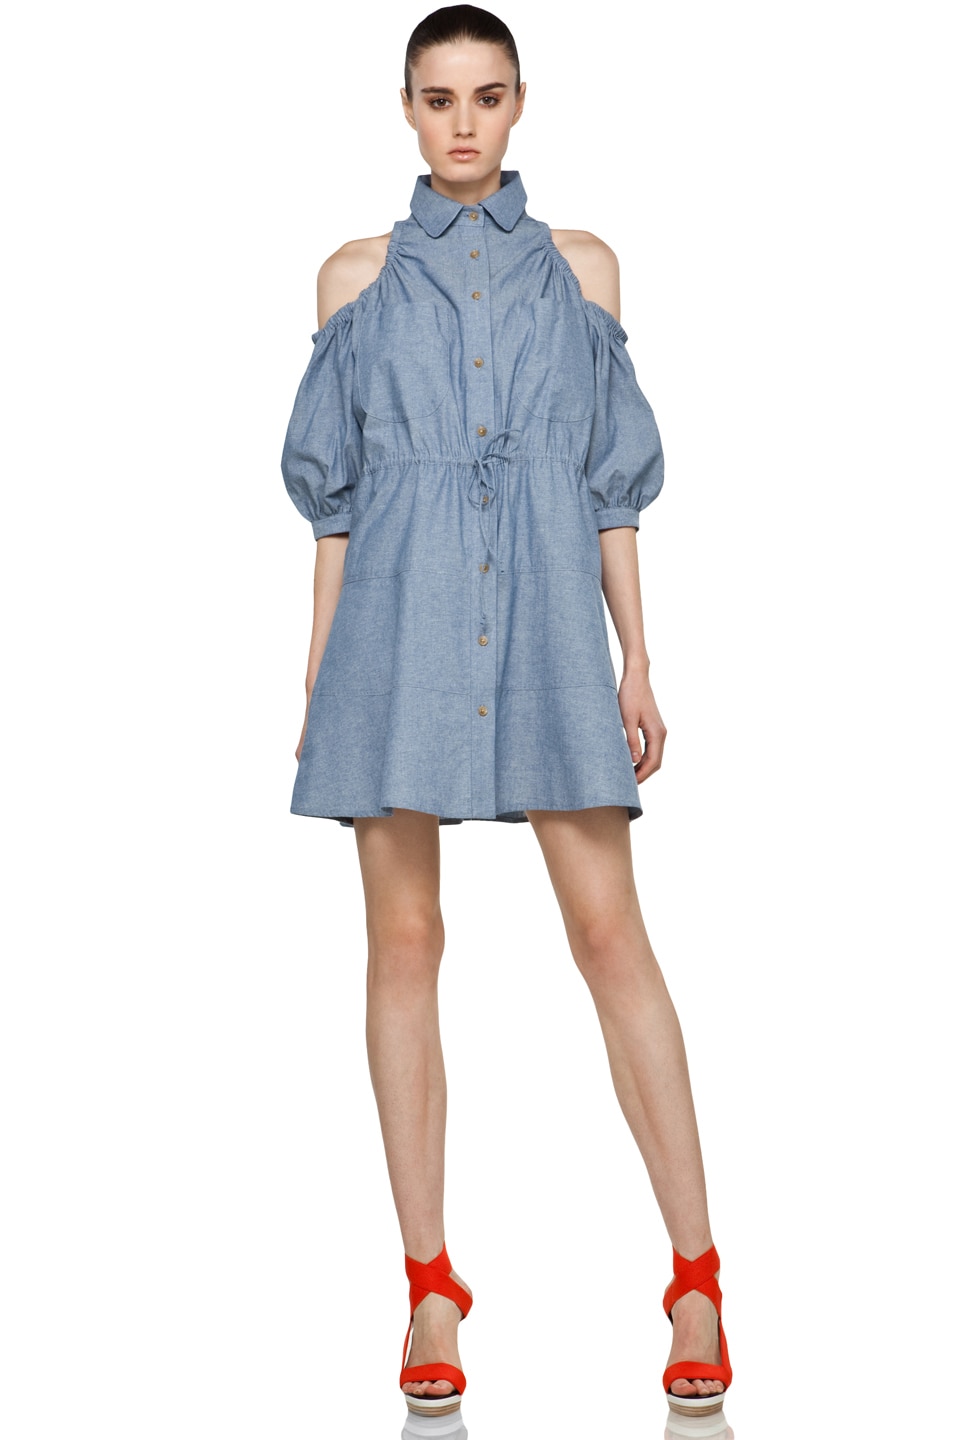 Image 1 of Chloe Sevigny for Opening Ceremony Cut Out Shoulder Blouse Dress in Chambray Blue